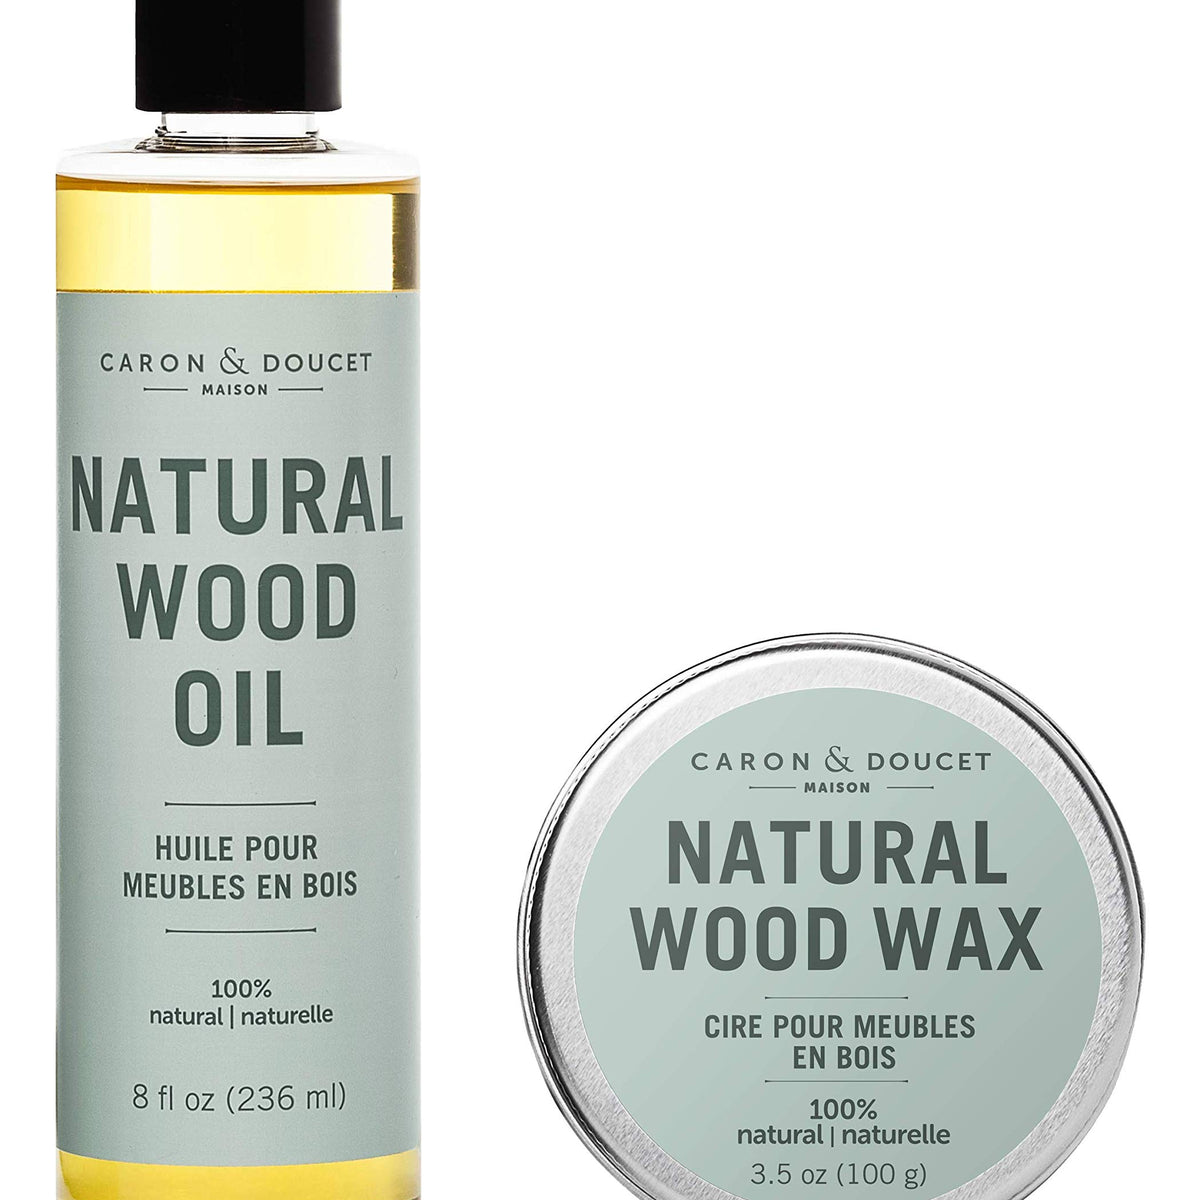 Caron & Doucet - Natural Wood Conditioning Vegan Wax Finish - 100% Plant Based Wood Conditioning and Polishing Wax Finish - Orange Scented - Suitable